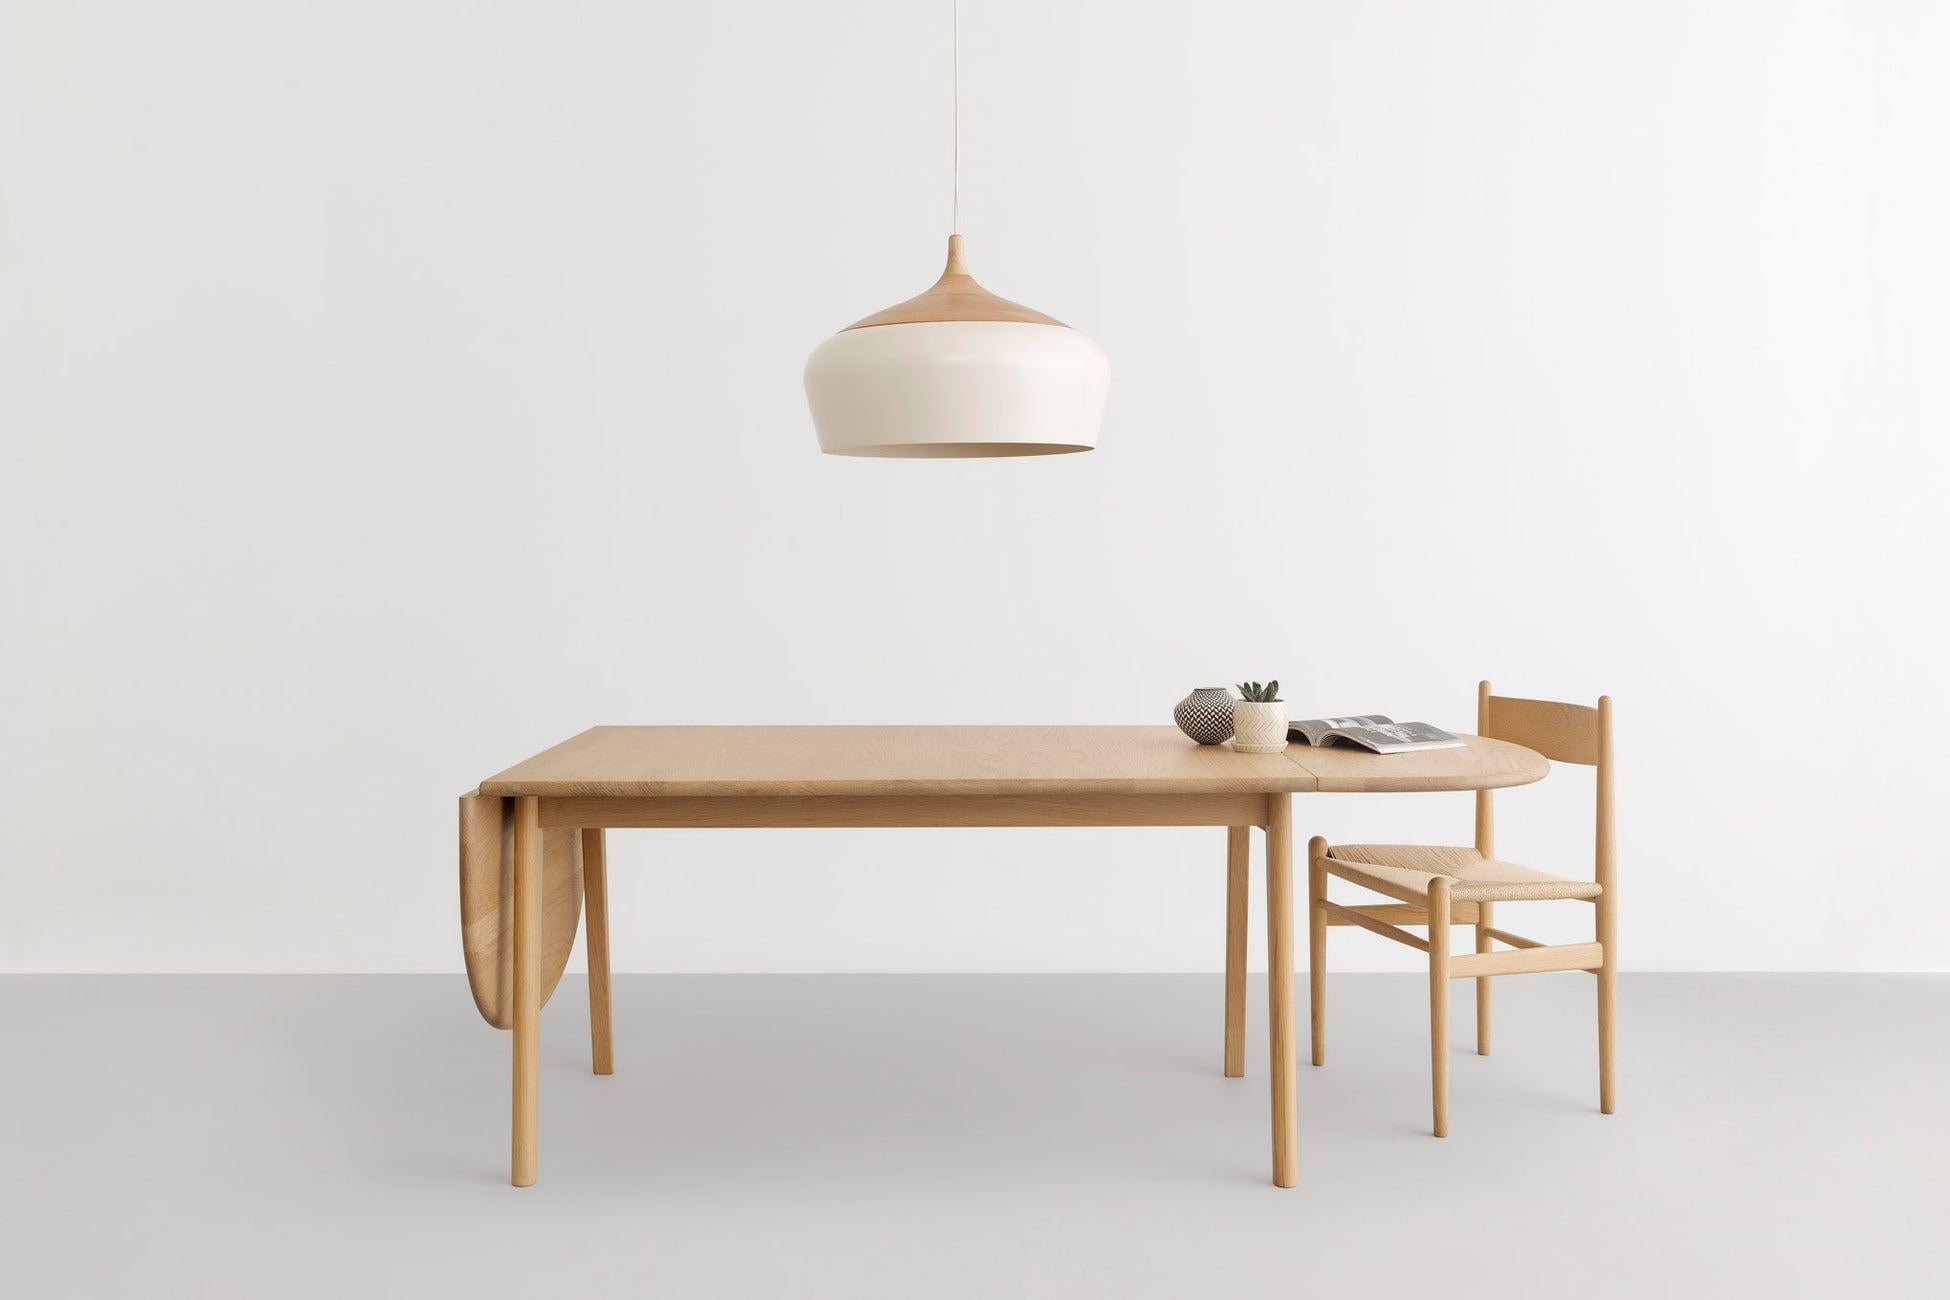 Influenced by Scandinavian and Japanese aesthetics, Coco's hand-turned victorian ash top holds its spun white, powdercoat aluminum shade. Like a beautiful, heavy yo-yo at the end of its string, Coco hangs in space with a silent poise. Do as the